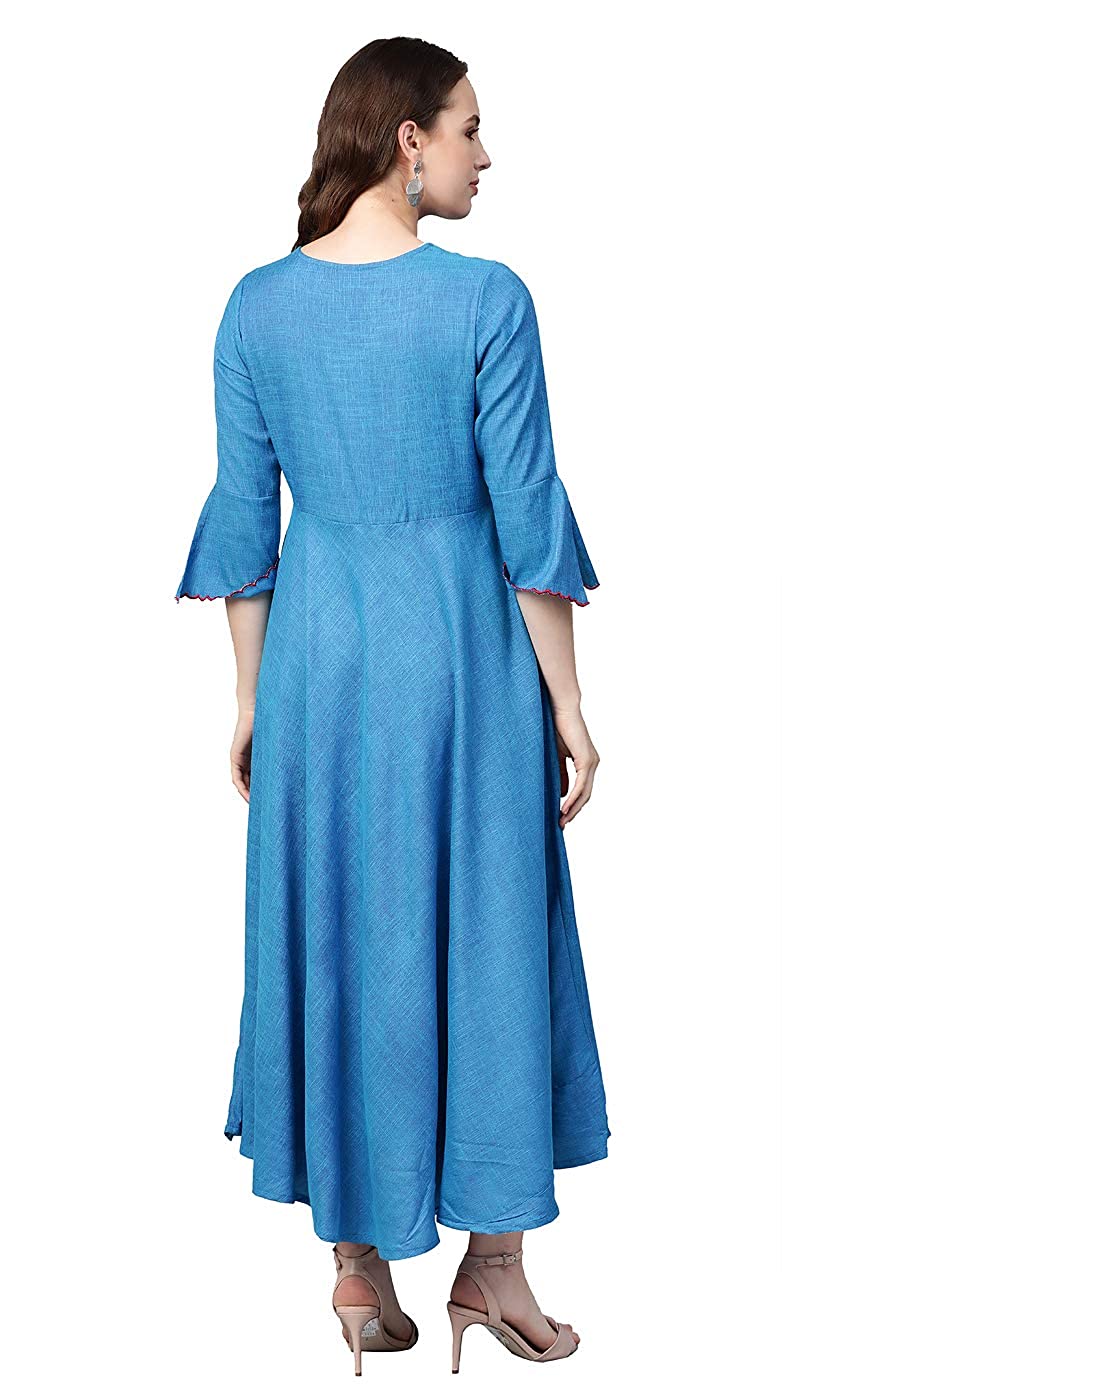 Yash Gallery Women's Viscose Embroidered Flared Dress for Women -  Dresses in Sri Lanka from Arcade Online Shopping - Just Rs. 5899!